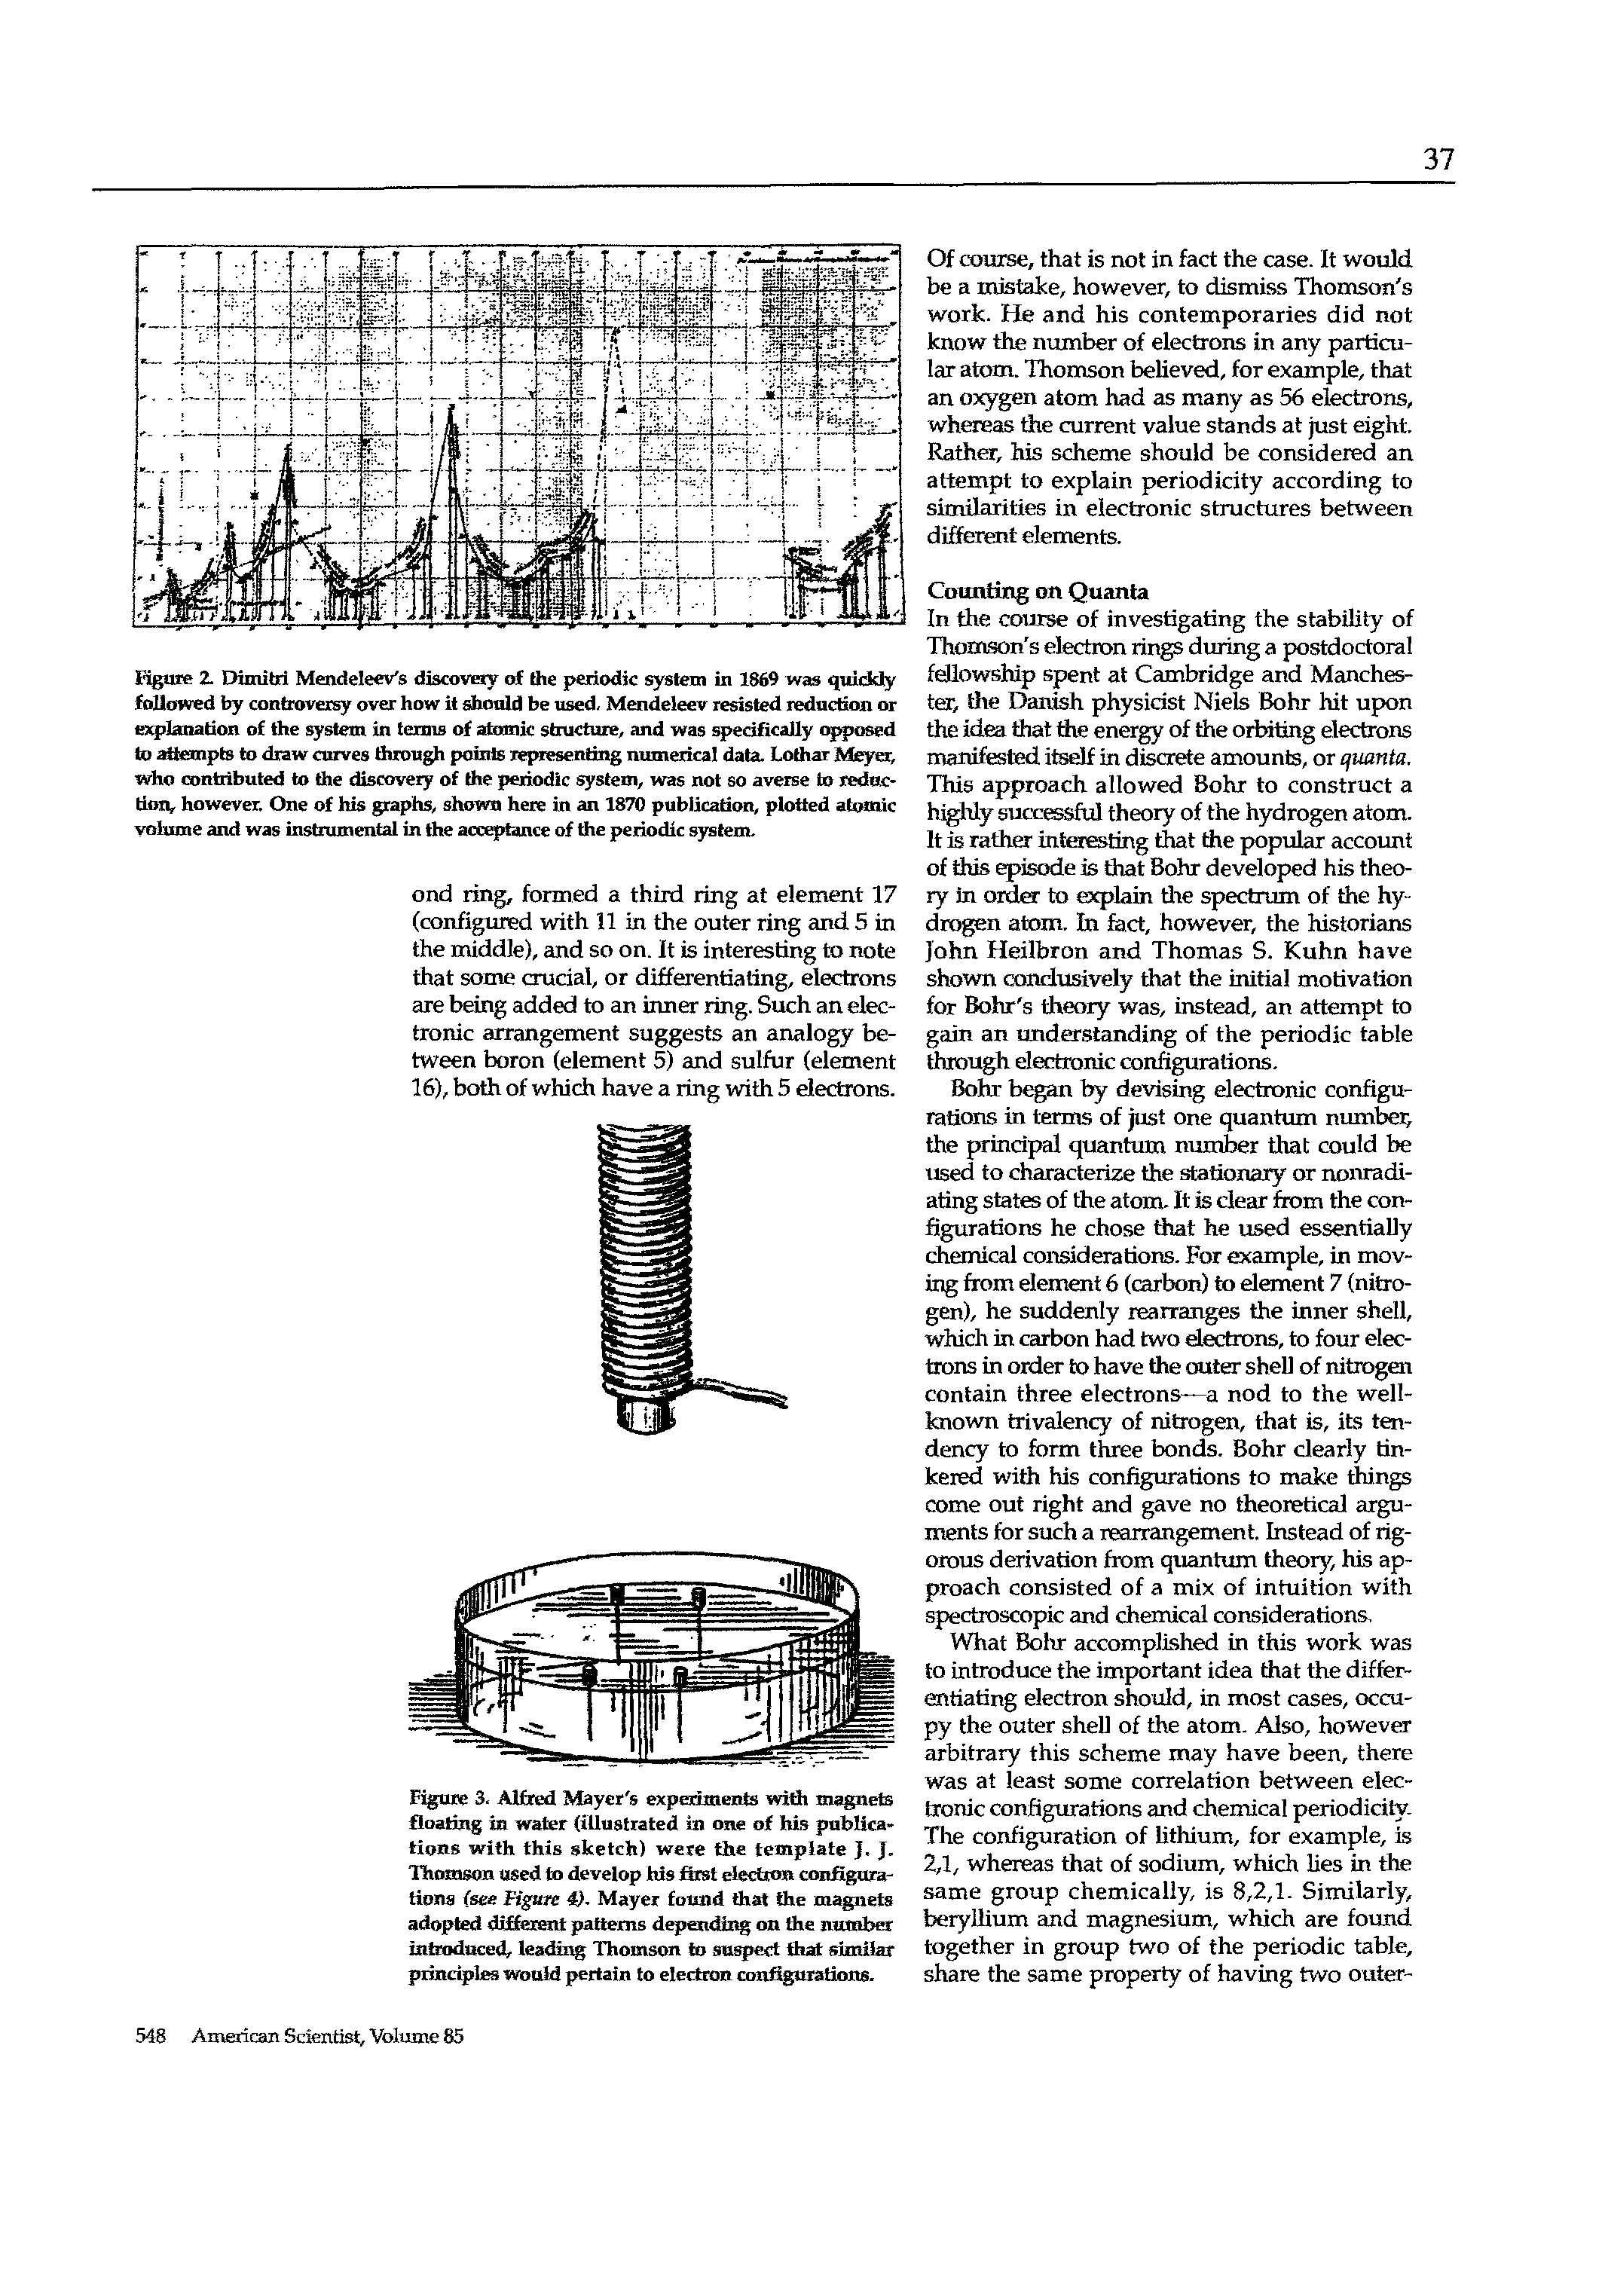 Figure 2. Dimitri Mendeleev s discovery of the periodic system in 1869 was quickly followed by controversy over how it should be used, Mendeleev resisted reduction or explanation of the system in terms of atomic structure, and was specifically opposed to attempts to draw curves through points representing numerical data Lothar Meyer, who contributed to the discovery of the periodic system, was not so averse to reduction, however. One of his graphs, shown here in an 1870 publication, plotted atomic volume and was instrumental in the acceptance of the periodic system.